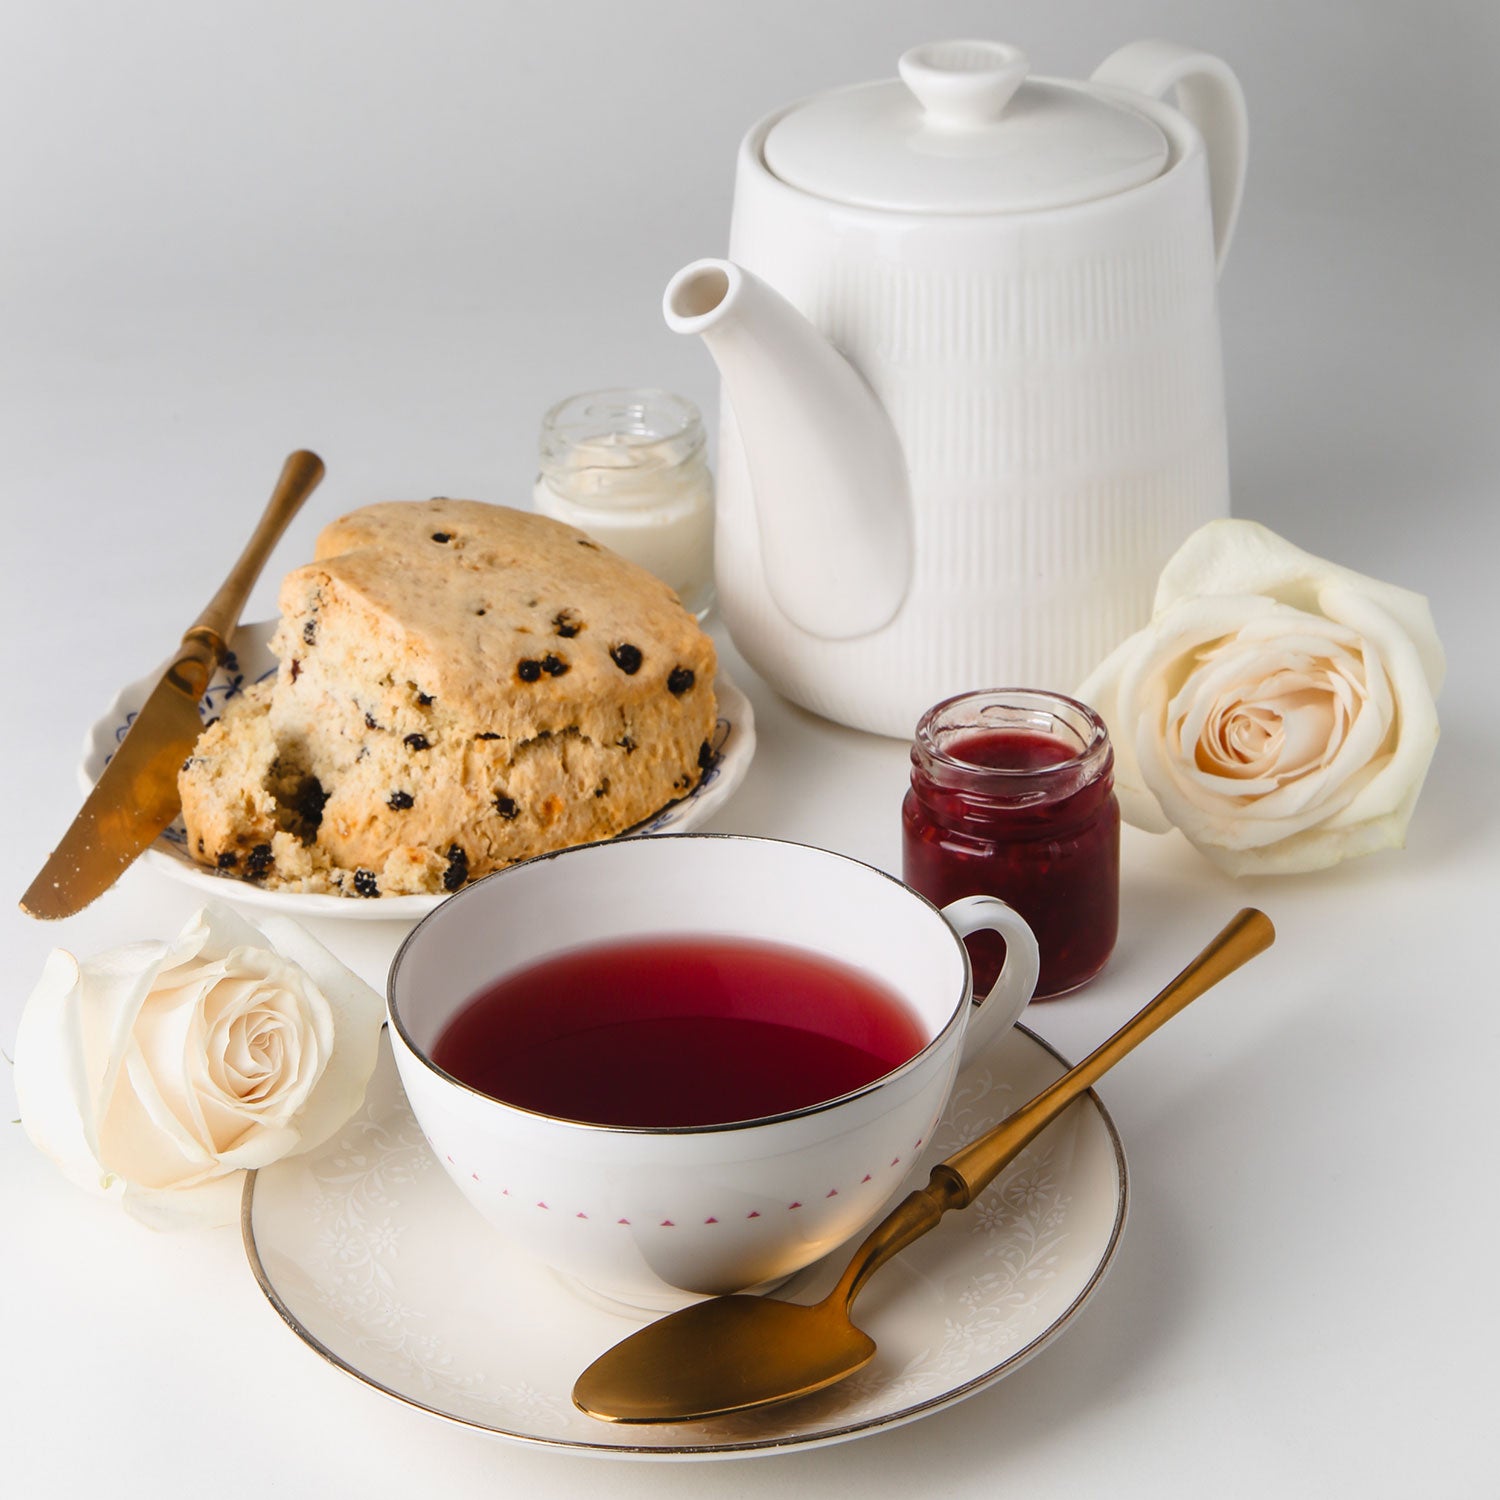 Tea party set, featuring herbal tea, and scone from The Tea House on Los Rios